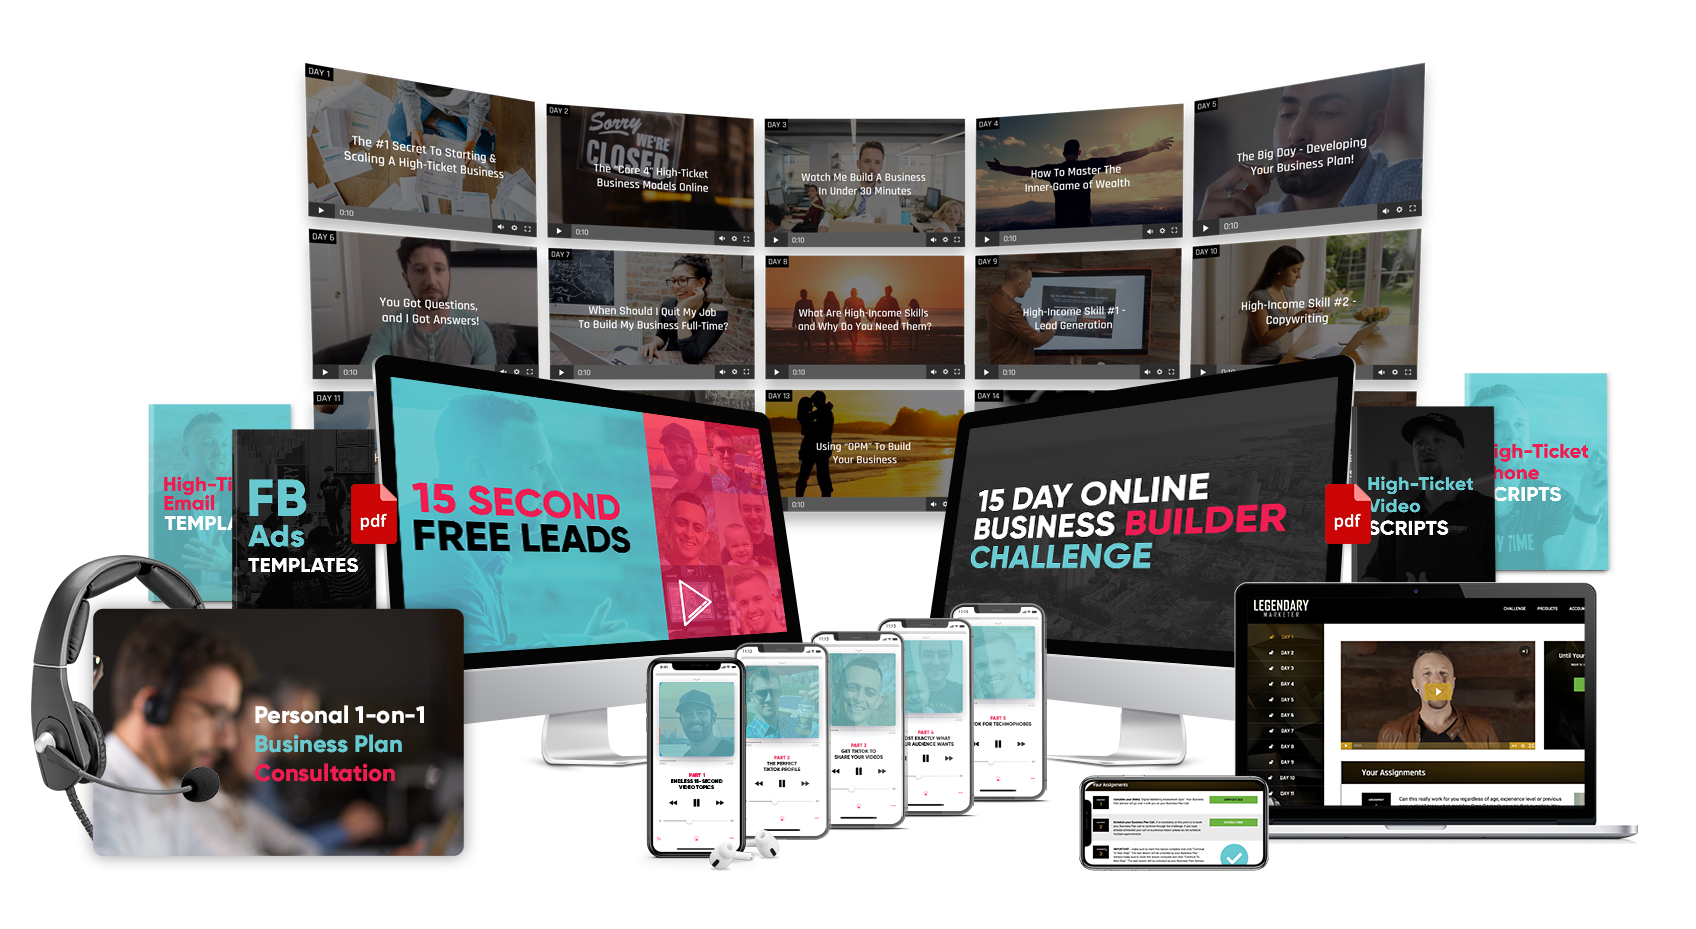 15 Second Free Leads Offer Stack